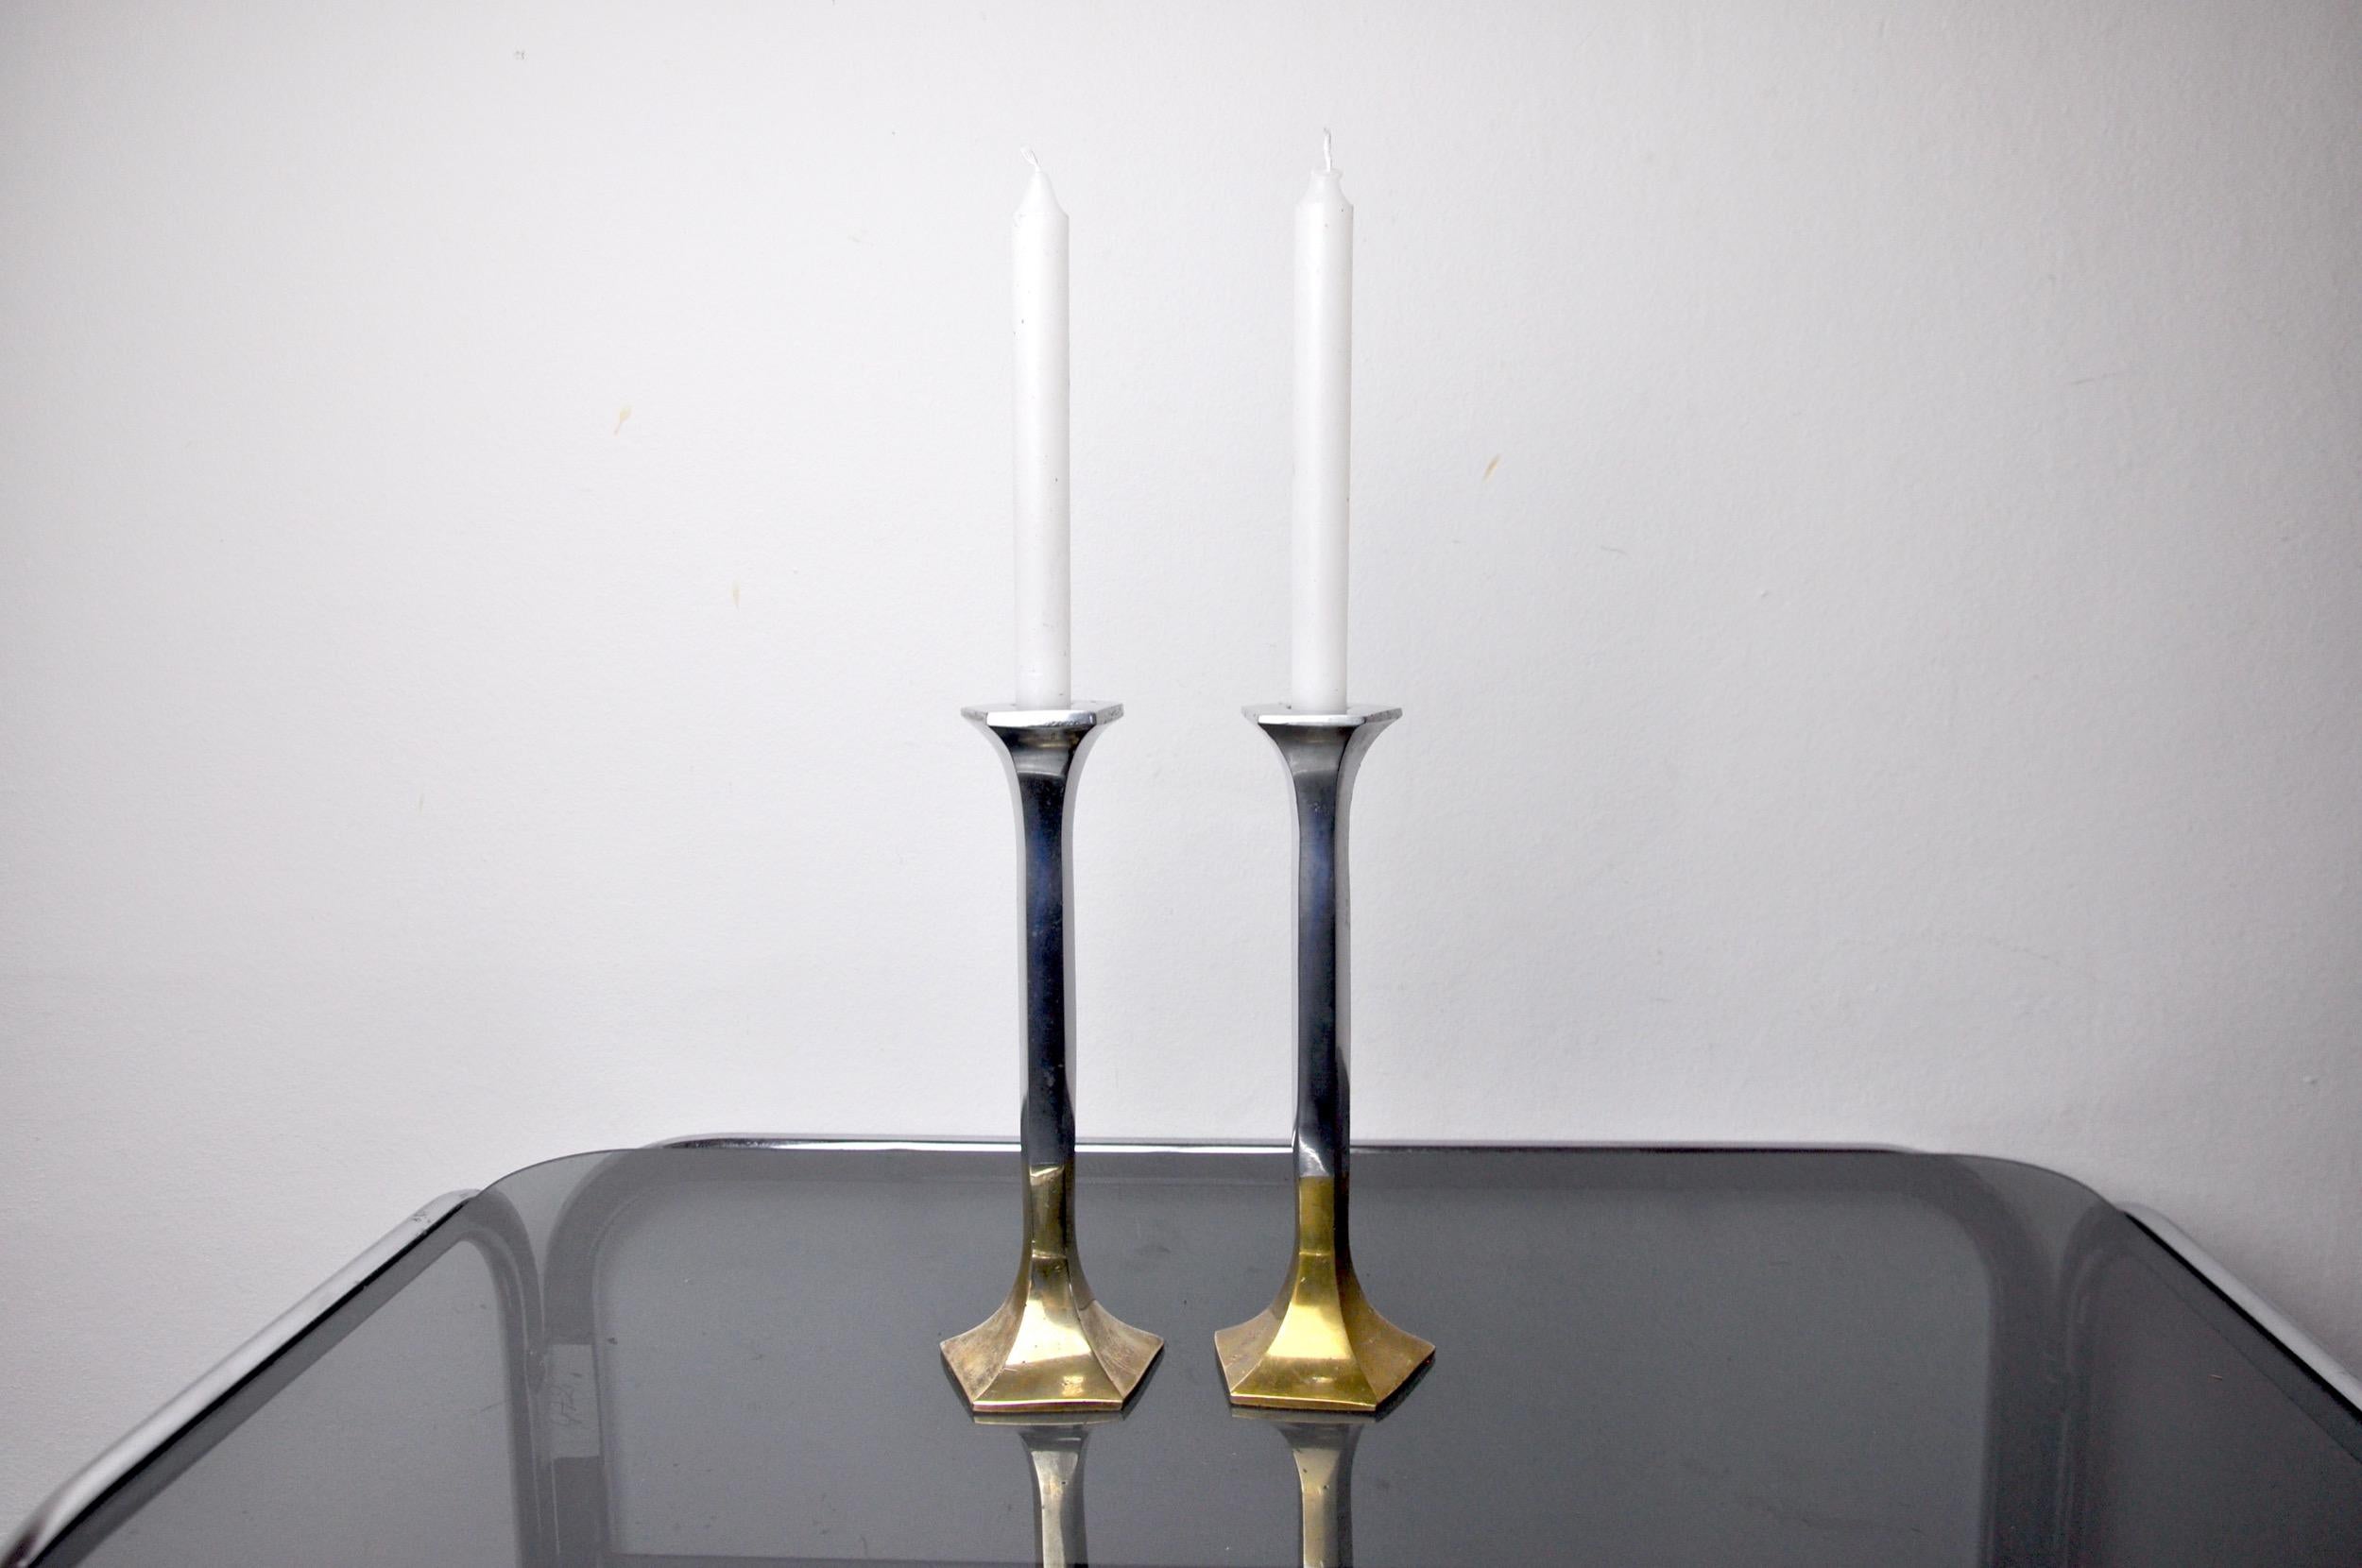 Hollywood Regency Pair of Brutalist Candlesticks by David Marshall, Spain, circa 1980 For Sale